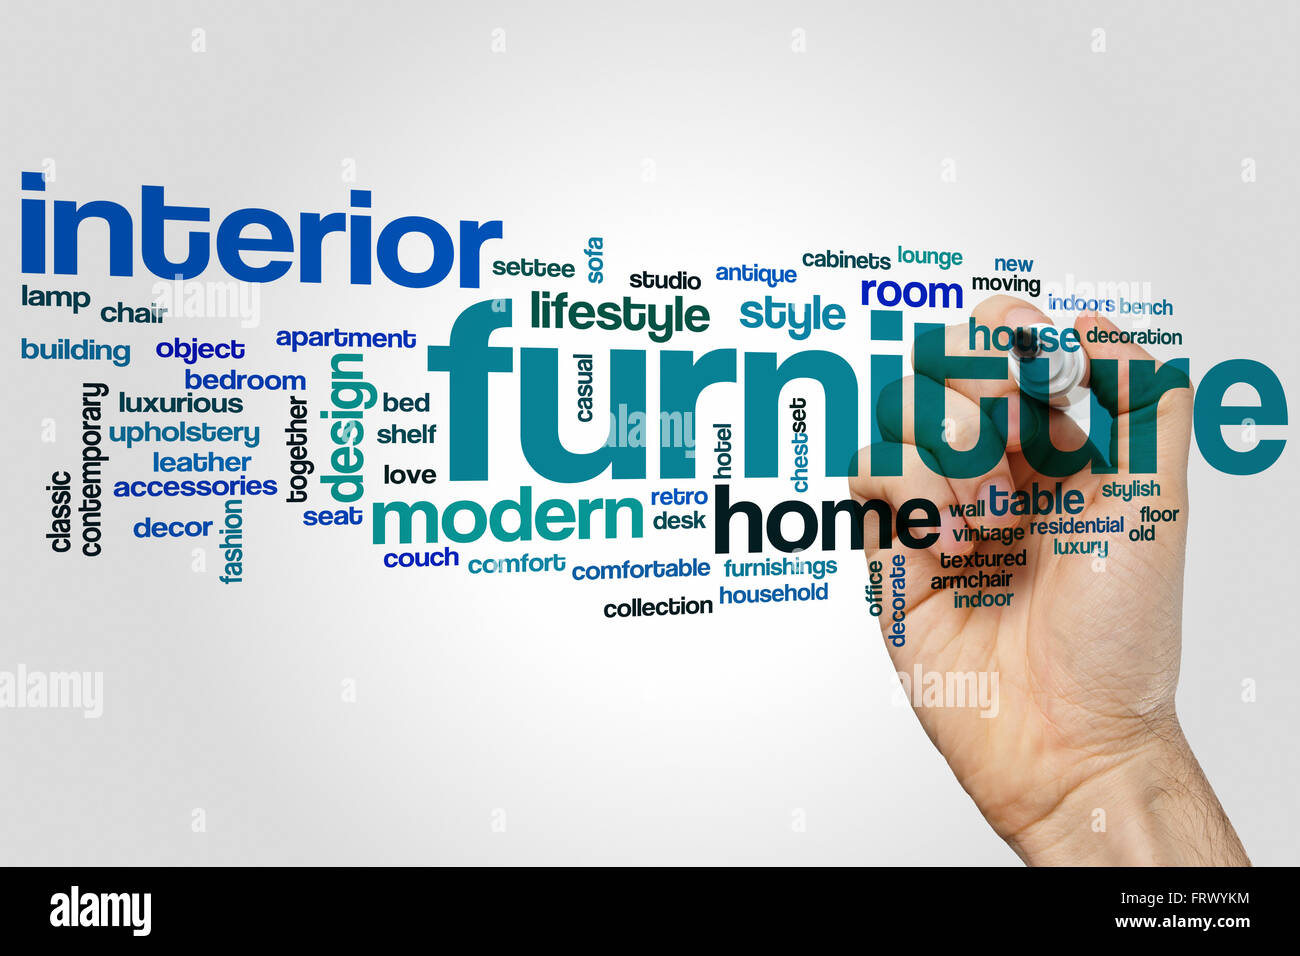 Furniture Word Cloud Concept Stock Photo 100759448 Alamy